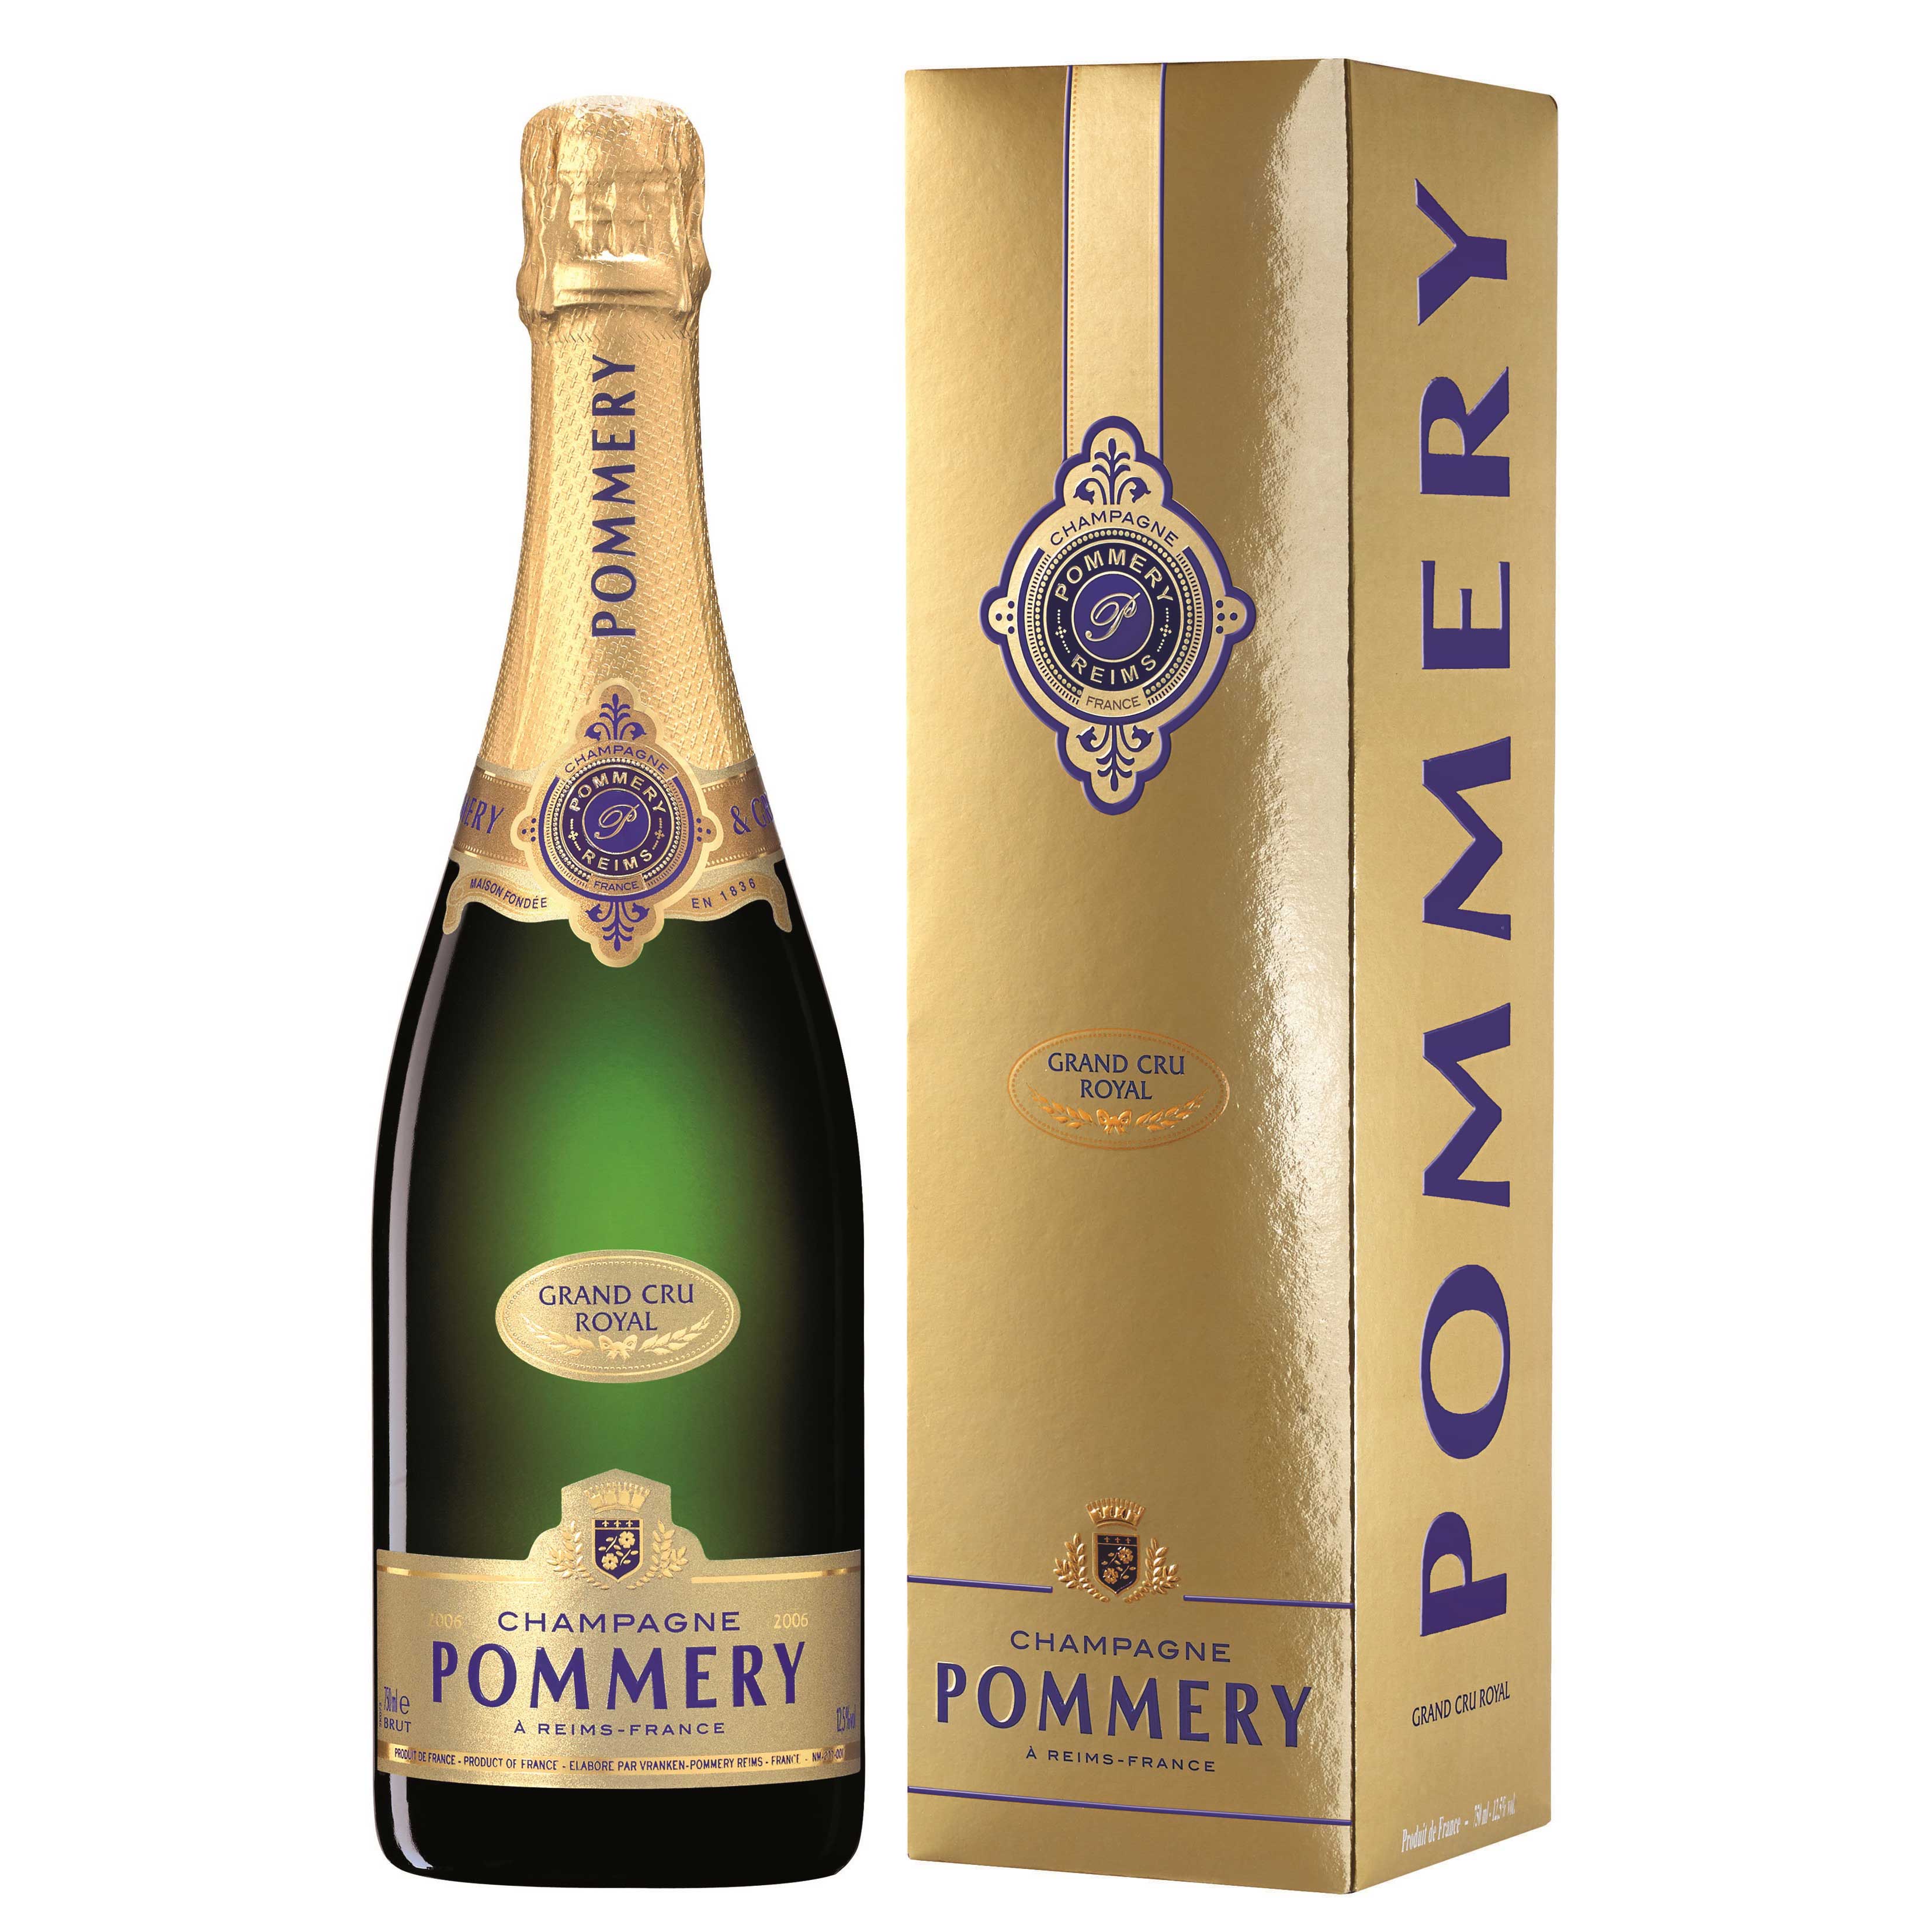 Pommery Grand Cru Vintage Champagne 75cl Great Price and Home Delivery